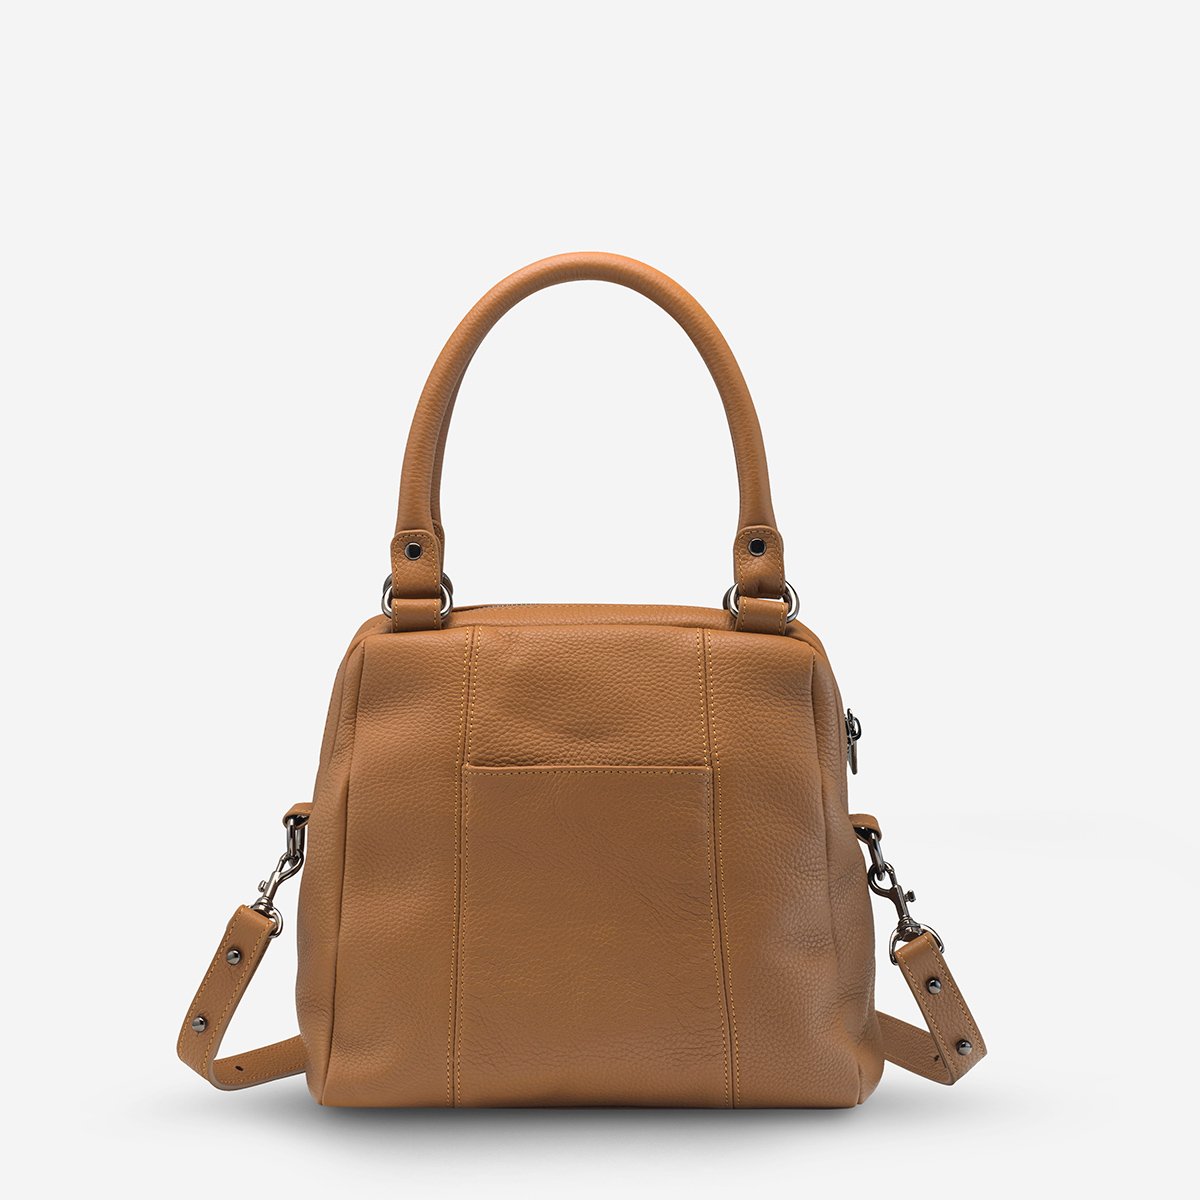 STATUS ANXIETY - Last Mountains Bag in Tan